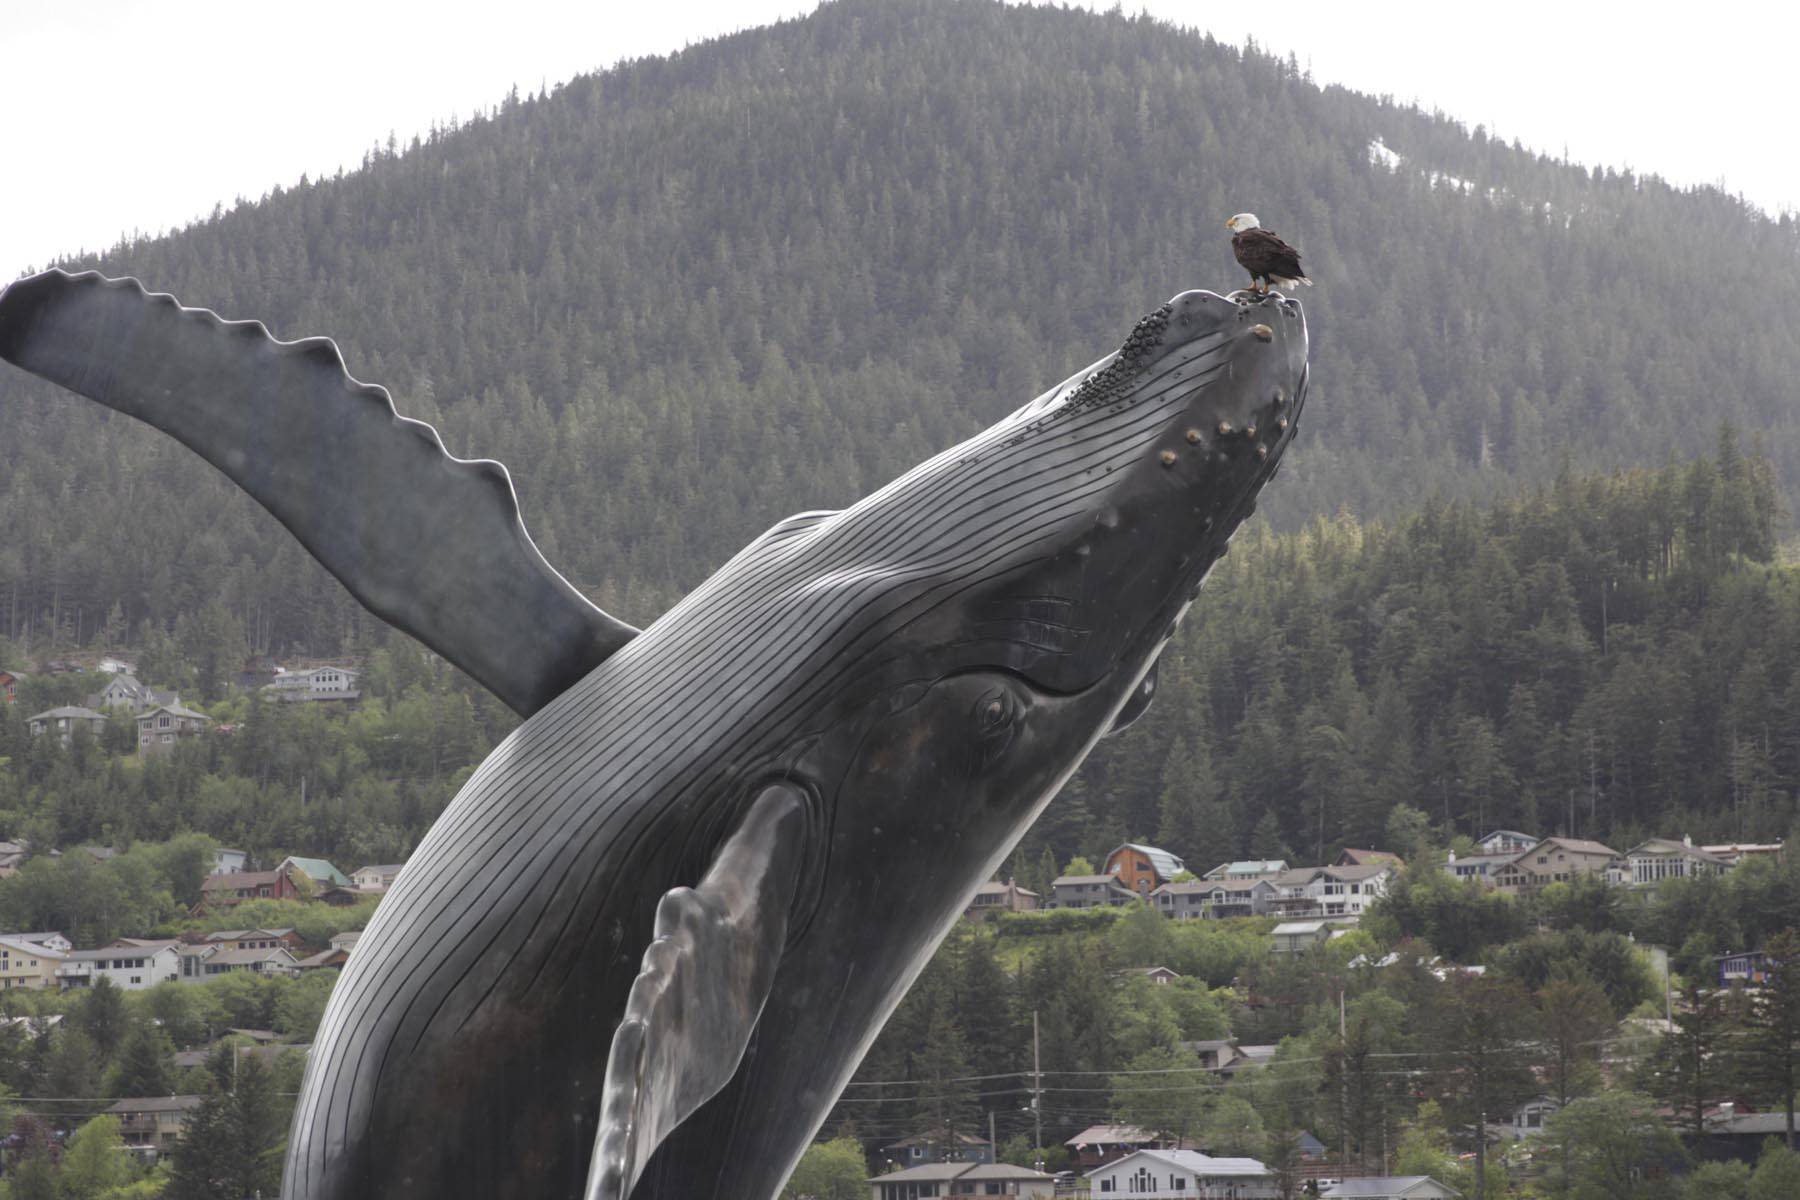 A bald eagle perches on top of the whale statue at Mayor Bill Overstreet Park on May 26, 2020. The pump rooms for the whale have been repaired after being damaged by flooding last October, but they will remain turned off for now to save costs and discourage gatherings. (Michael S. Lockett | Juneau Empire)